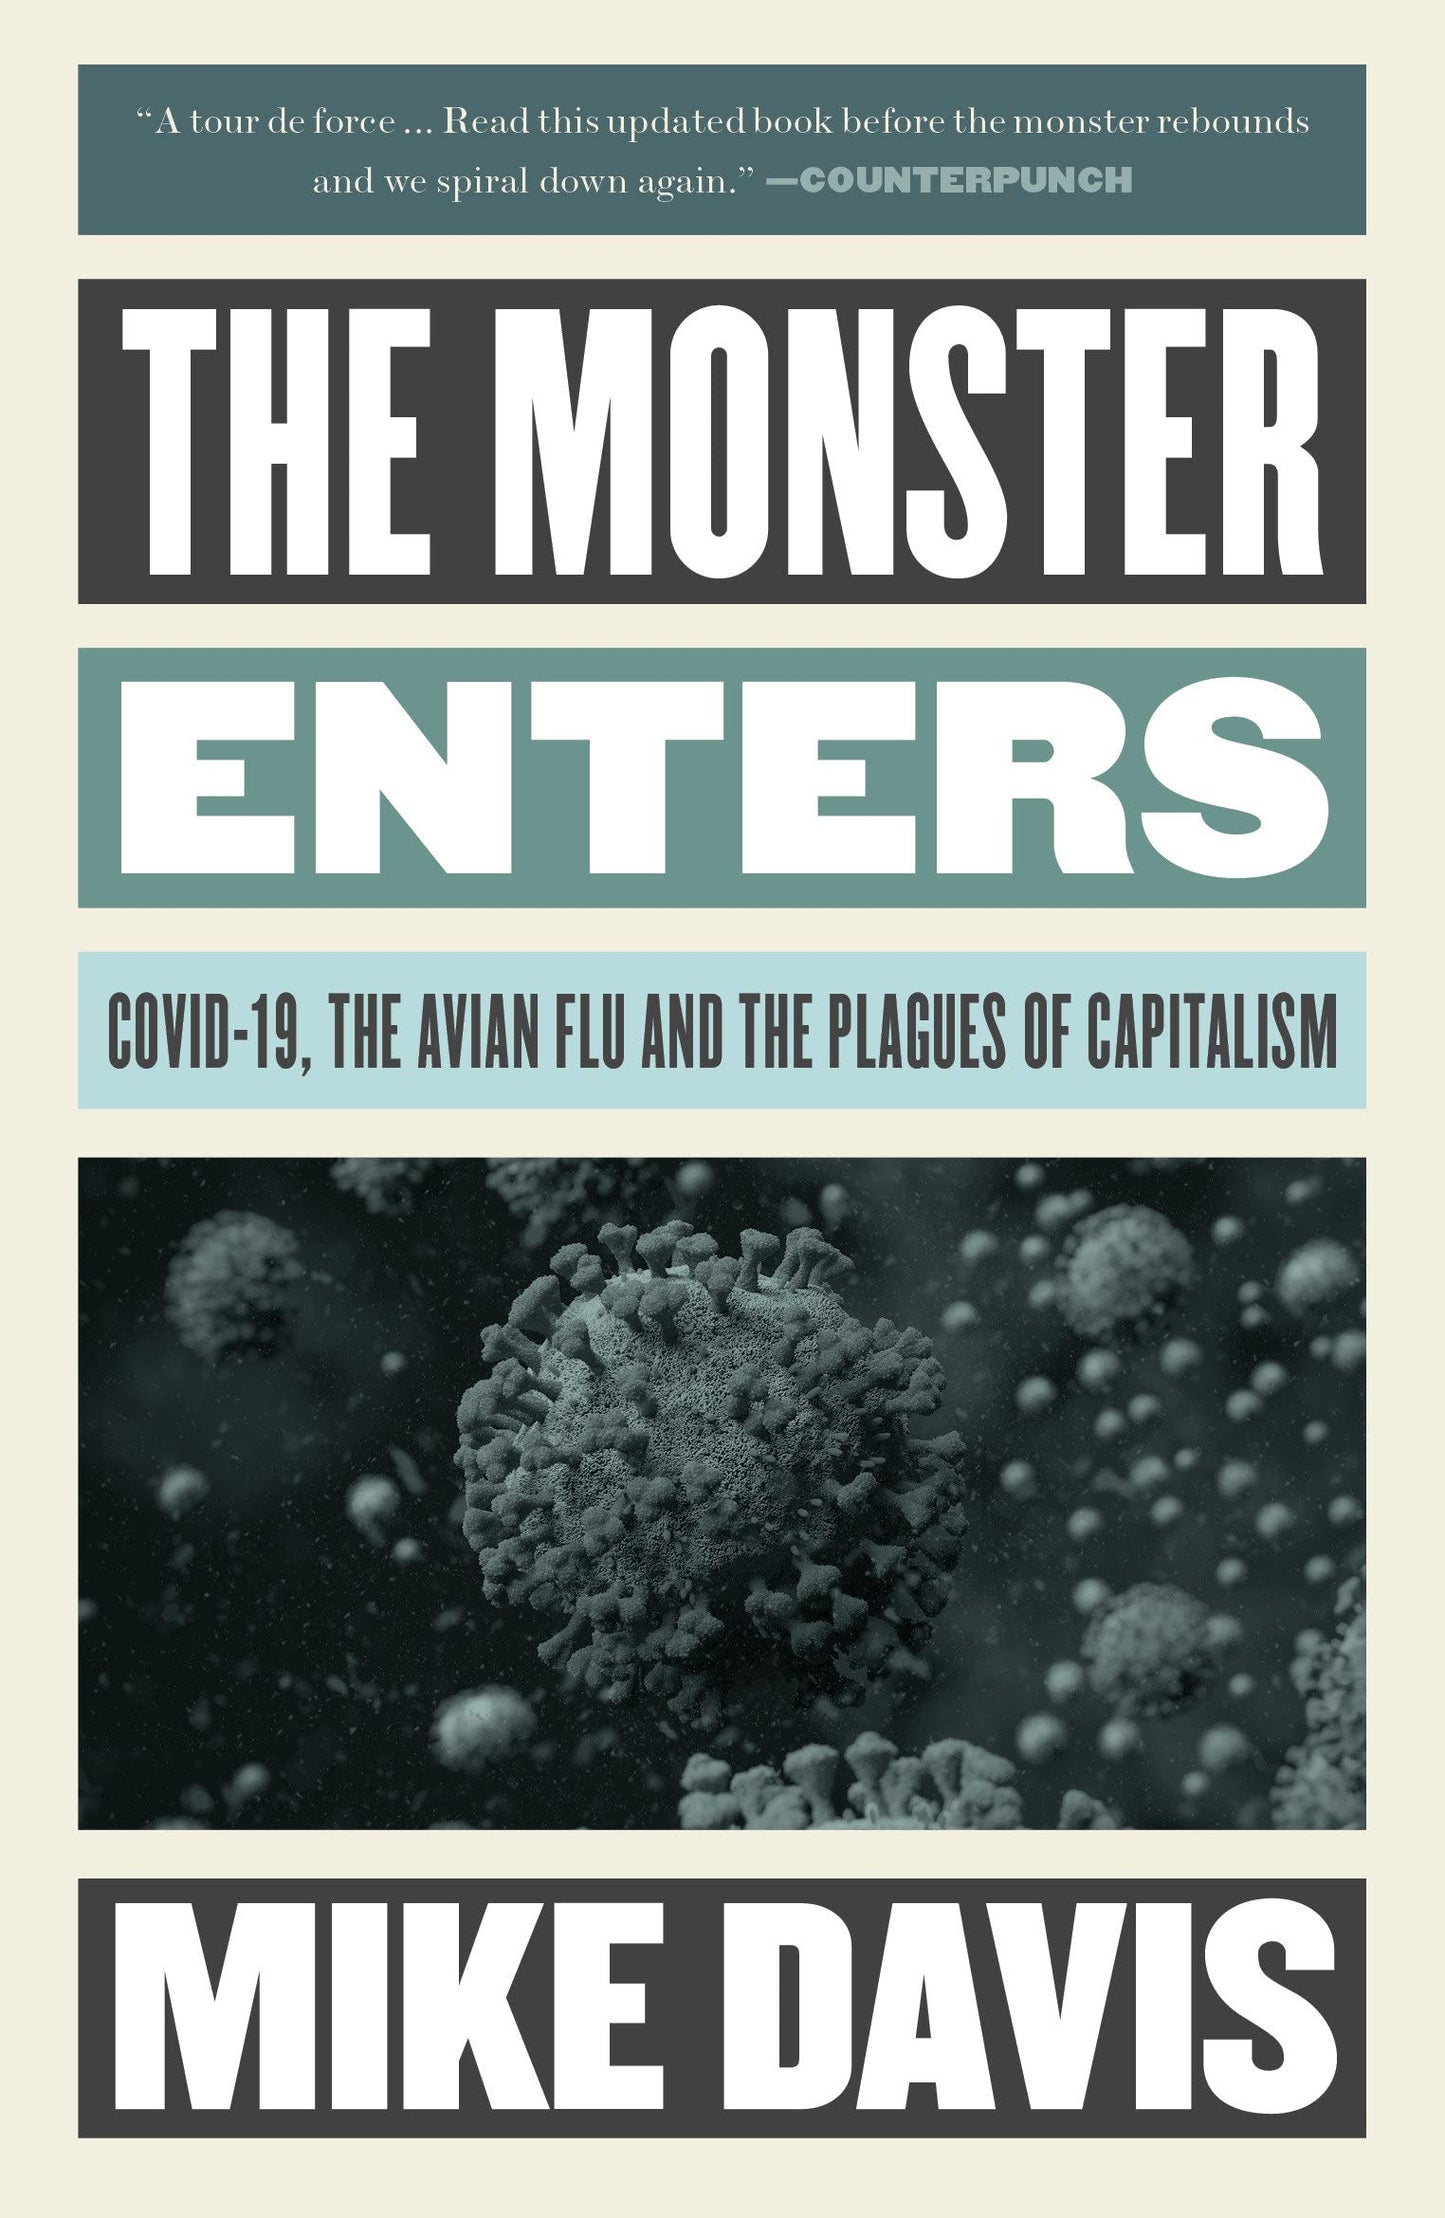 The Monster Enters: COVID-19, the Avian Flu and the Plagues of Capitalism, by Mike Davis